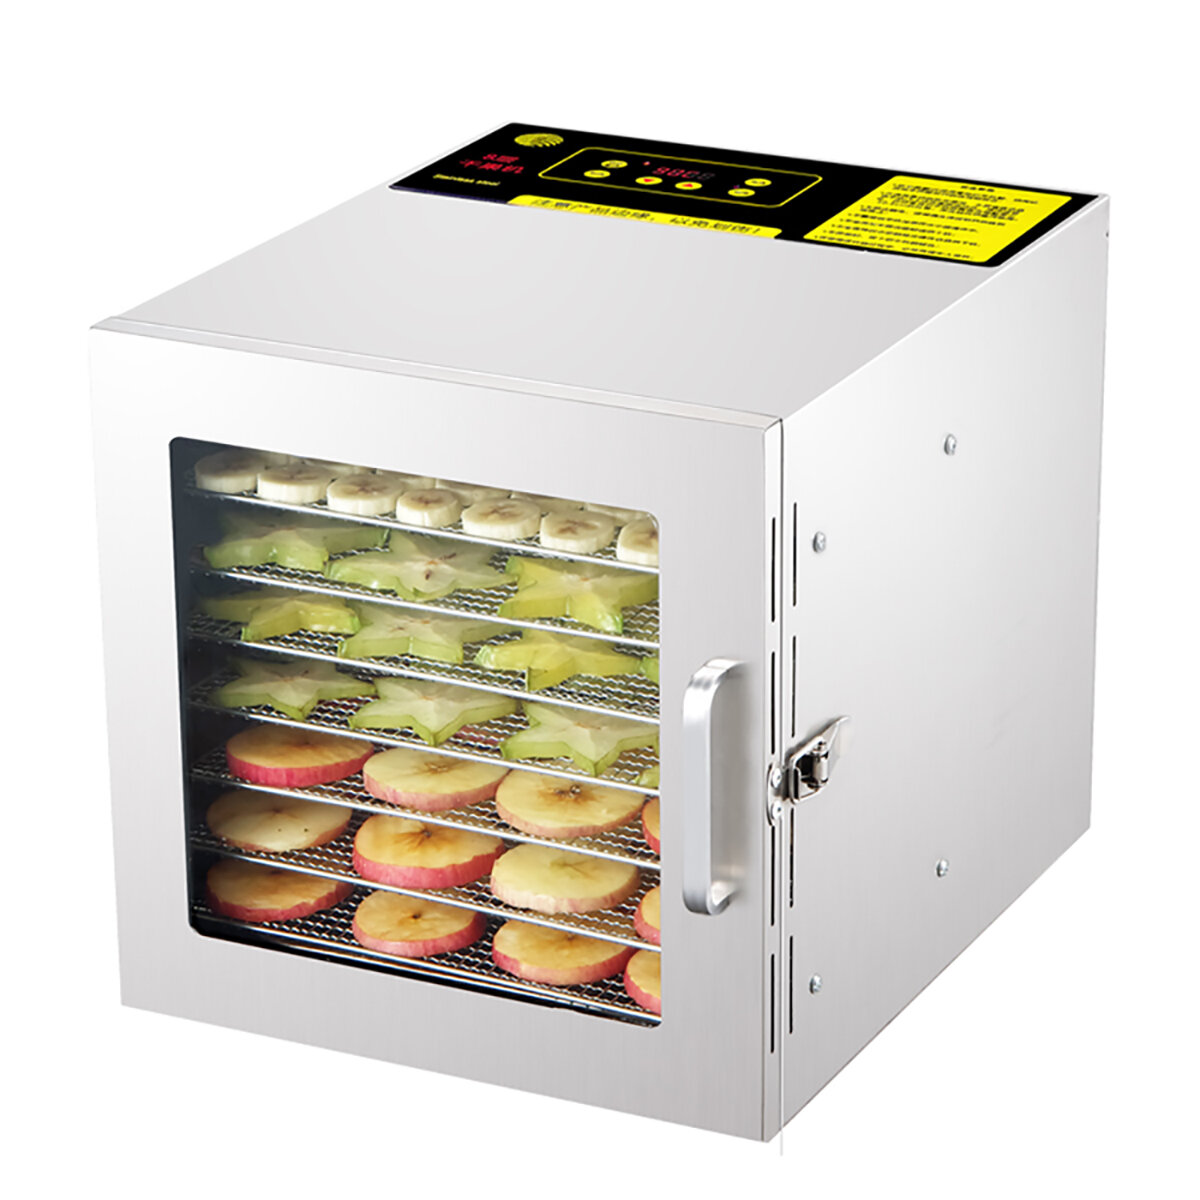 

8 Layers Stainless Steel Fruit & Food Dehydrator Vegetable Meat Hot Air Dryer For Household/Commercial/DIY Food 600W 220